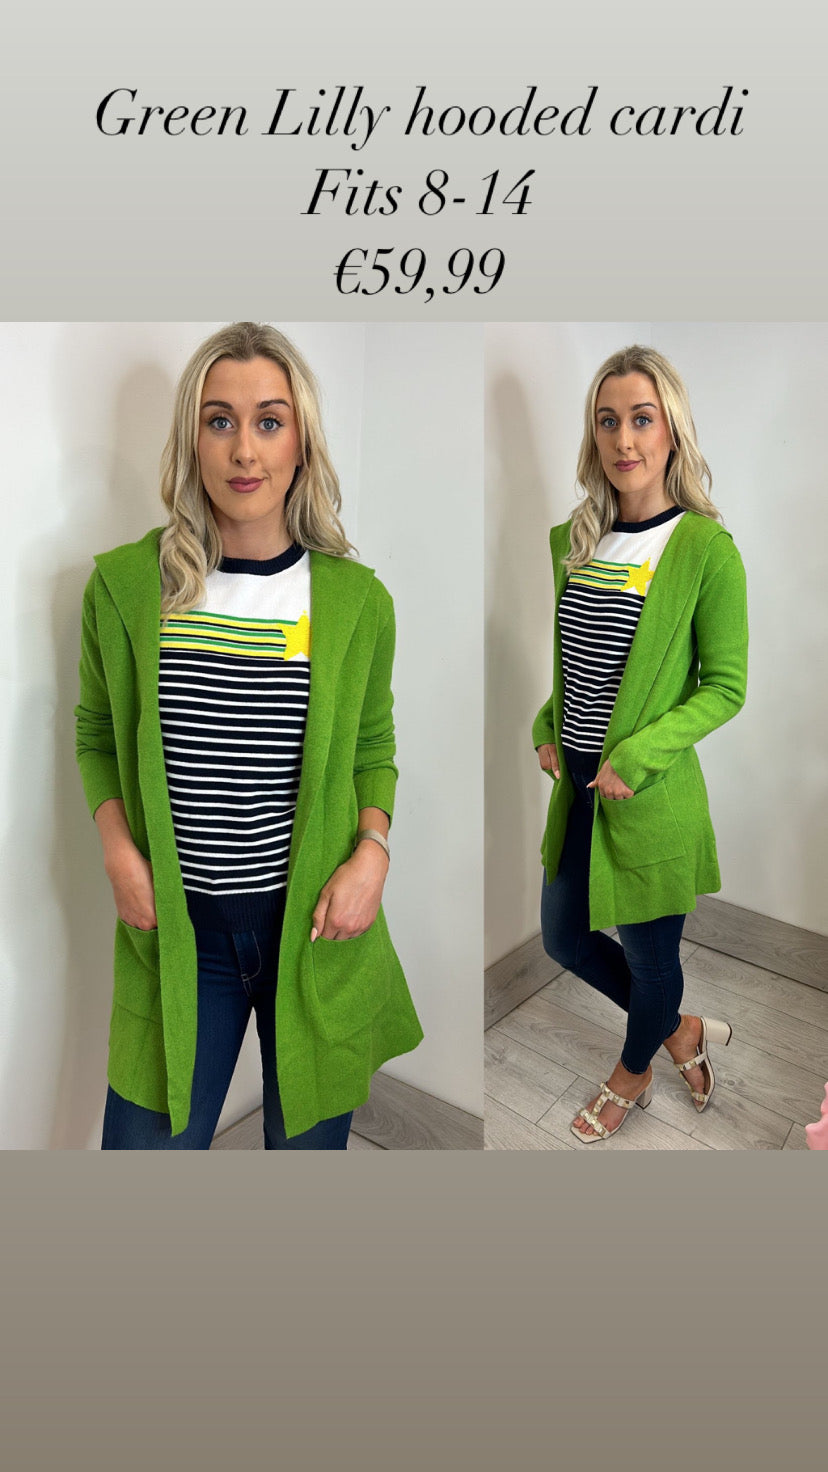 Green Lilly hooded cardi